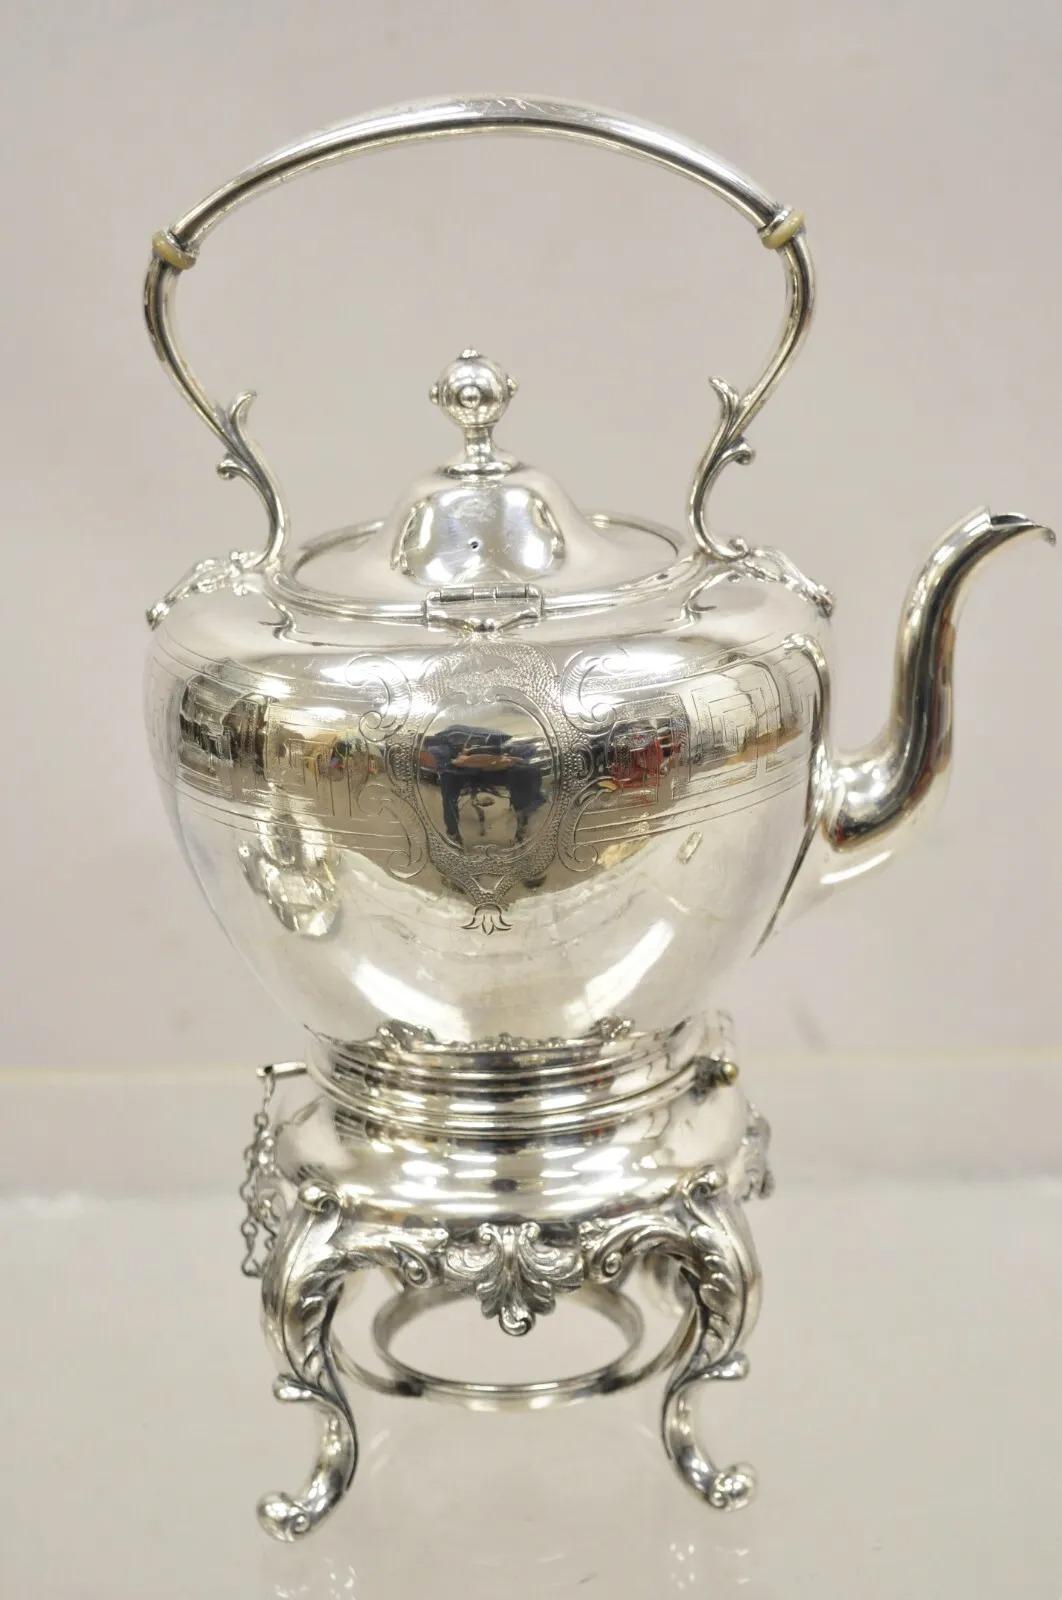 Antique Reed & Barton 1866 Silver Plated Victorian Tilting Tea Pot on Stand. Item features shield and greek key design, scrolling footed base, original hallmark. Circa Early to Mid 20th Century. Measurements:  13